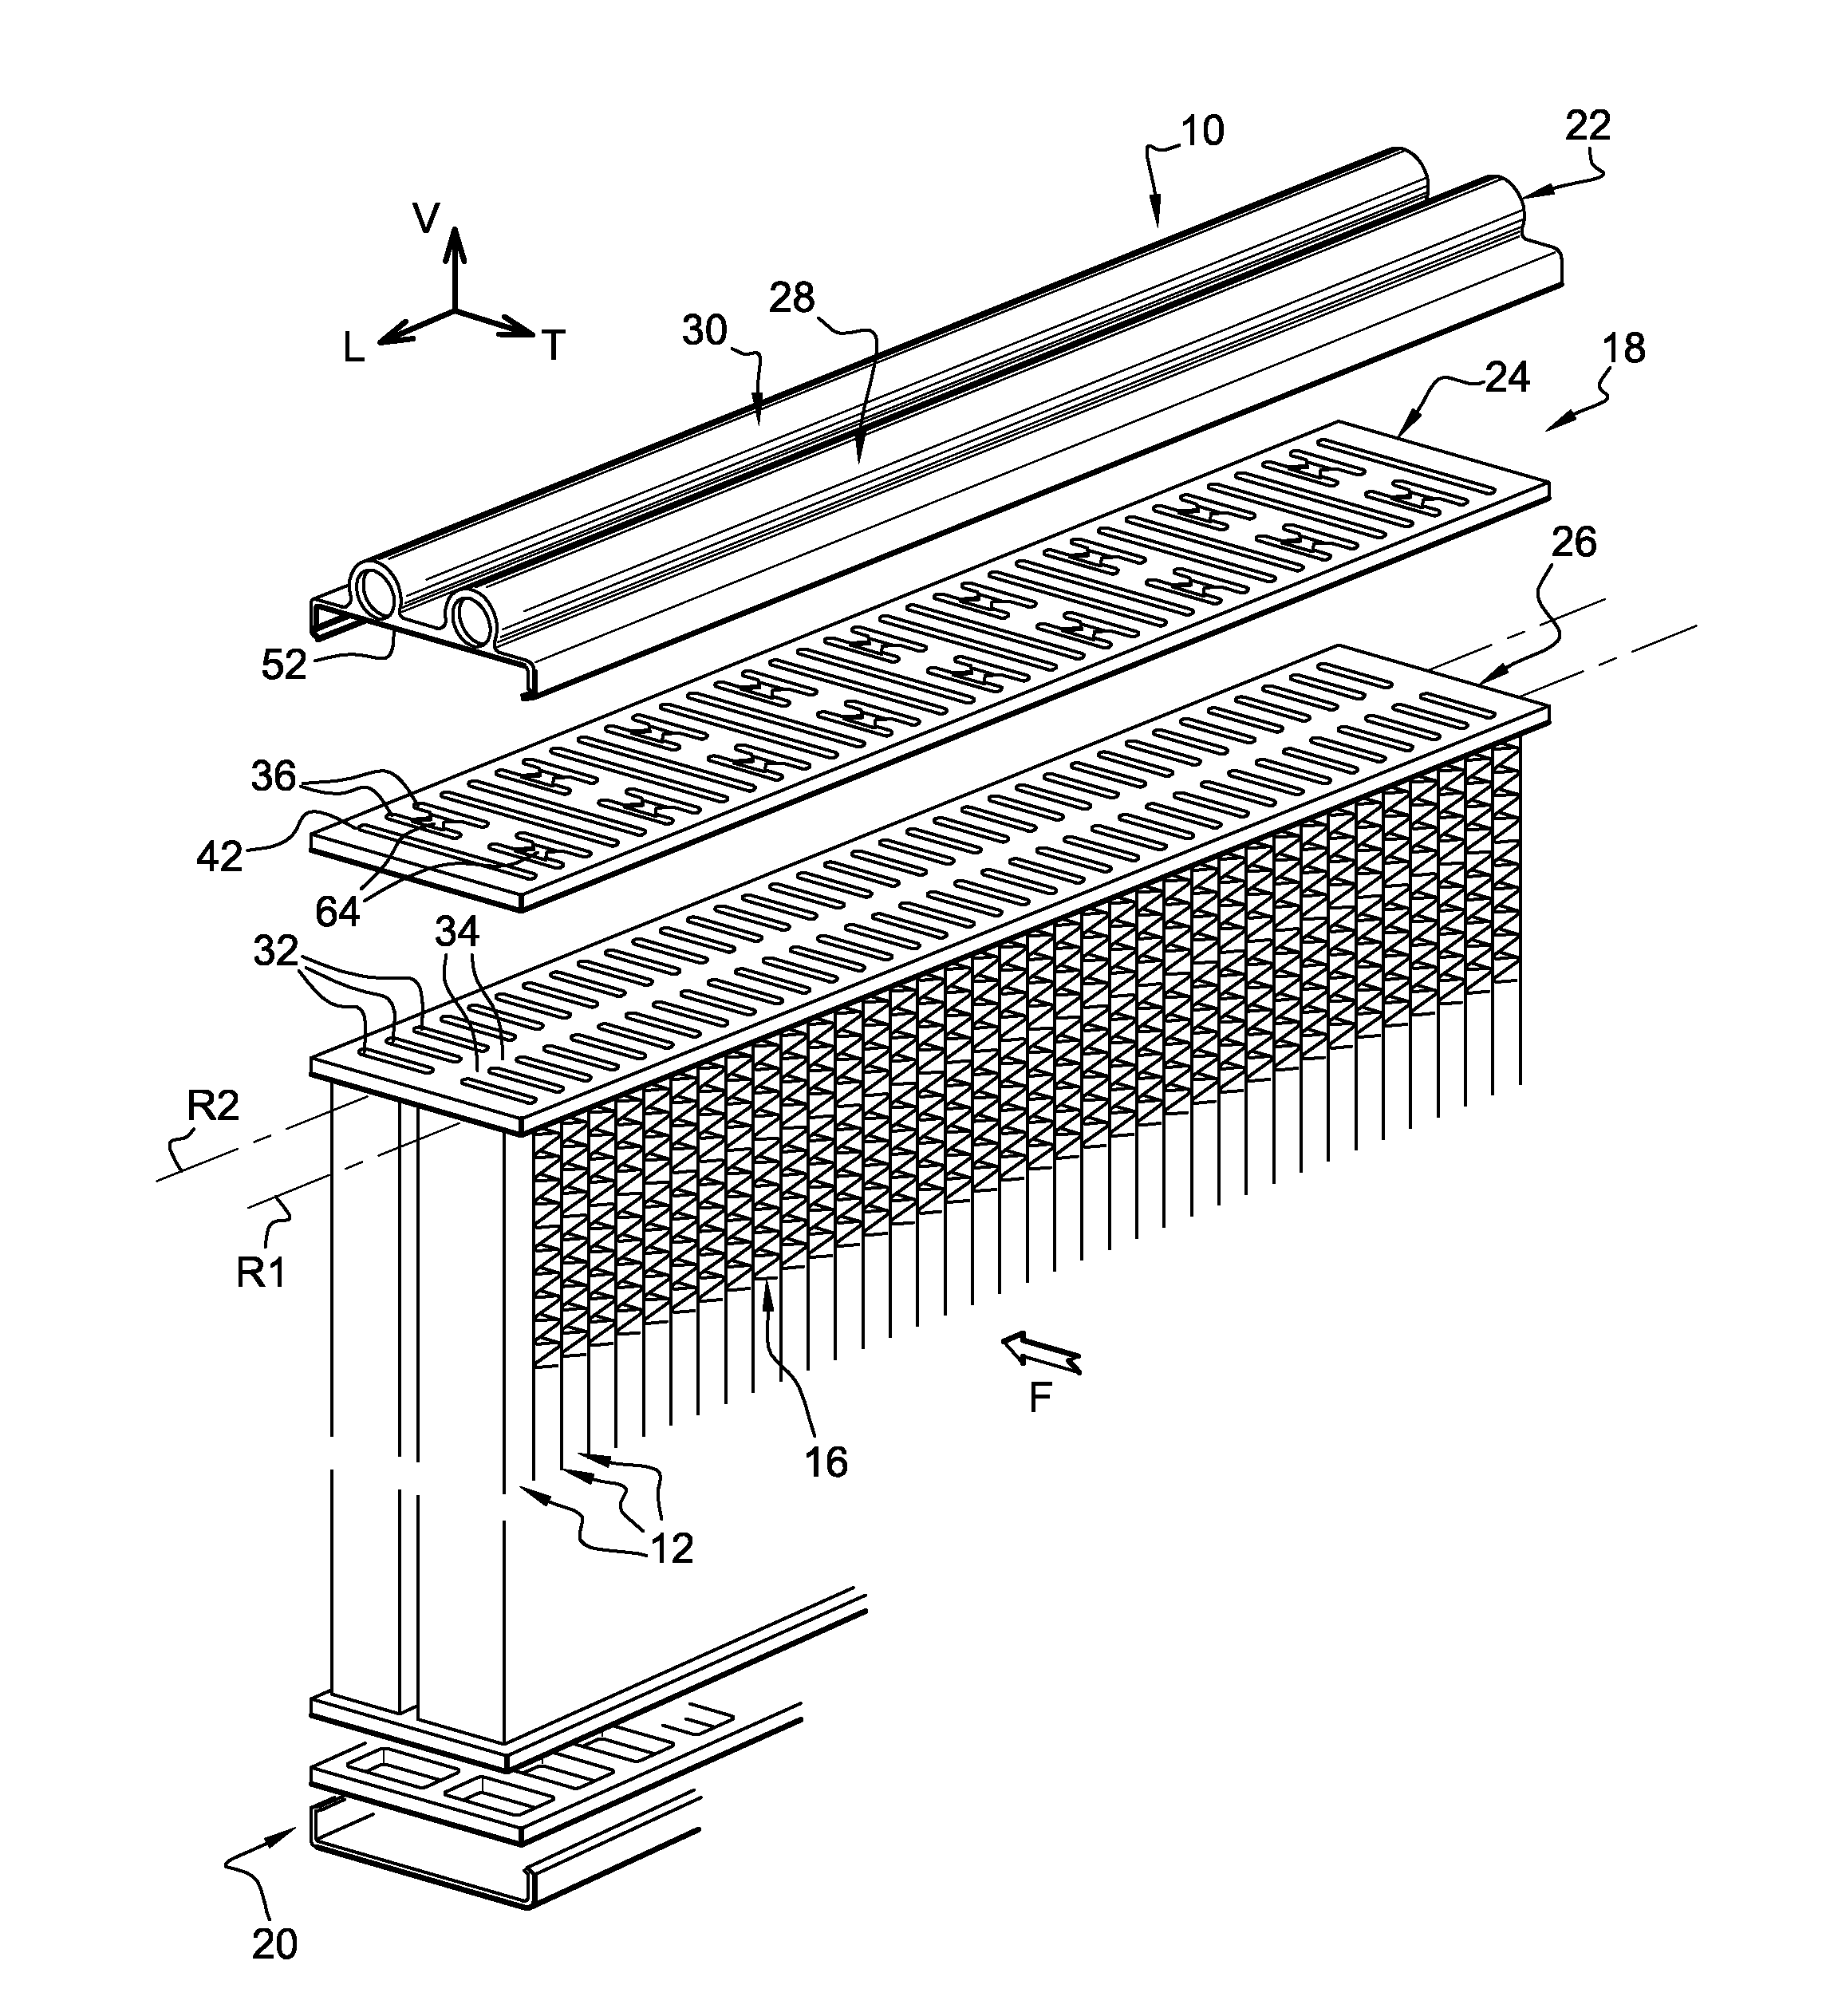 Heat exchanger with a mixing chamber